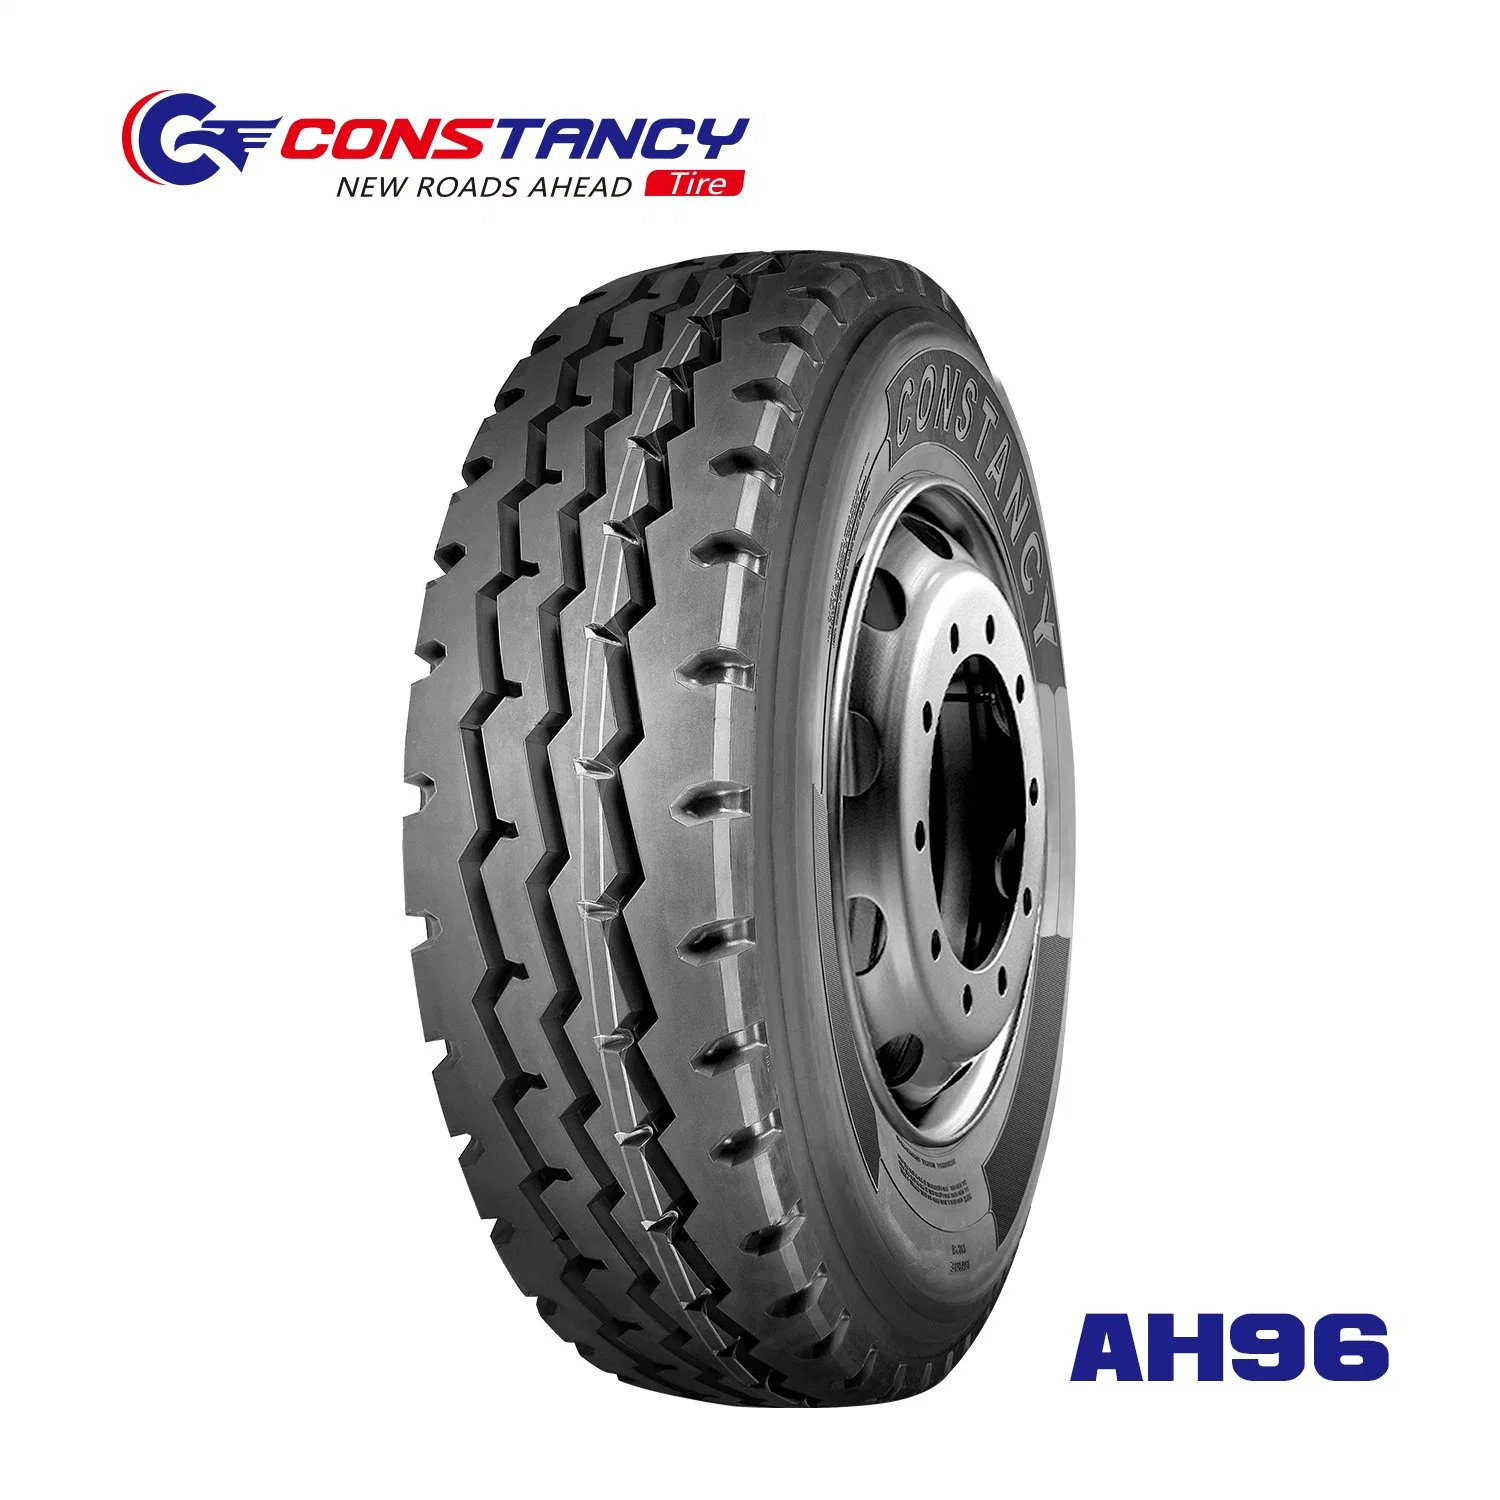 Truck Tire From Factory Yuelong (8.25R16) with Good Quality Brand Constancy